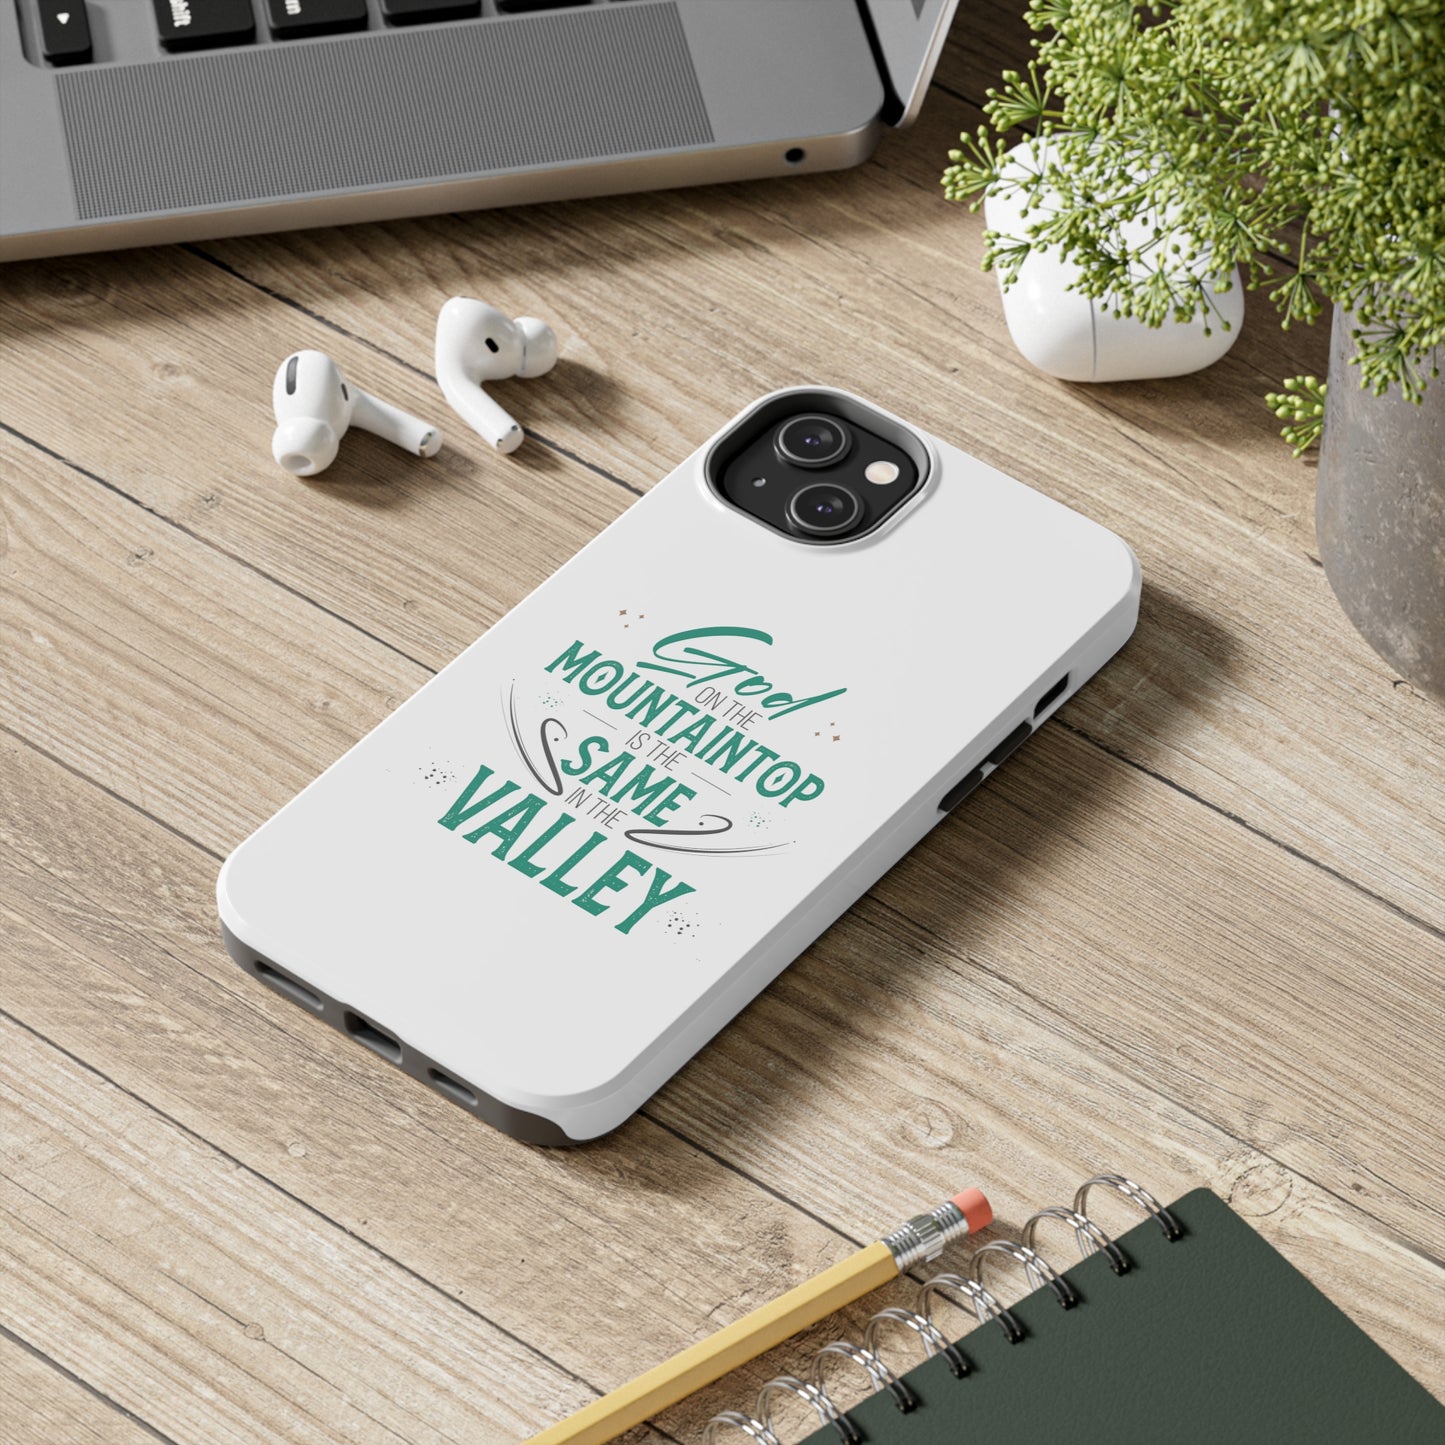 God At The Mountaintop Is The Same In The Valley Tough Phone Cases, Case-Mate